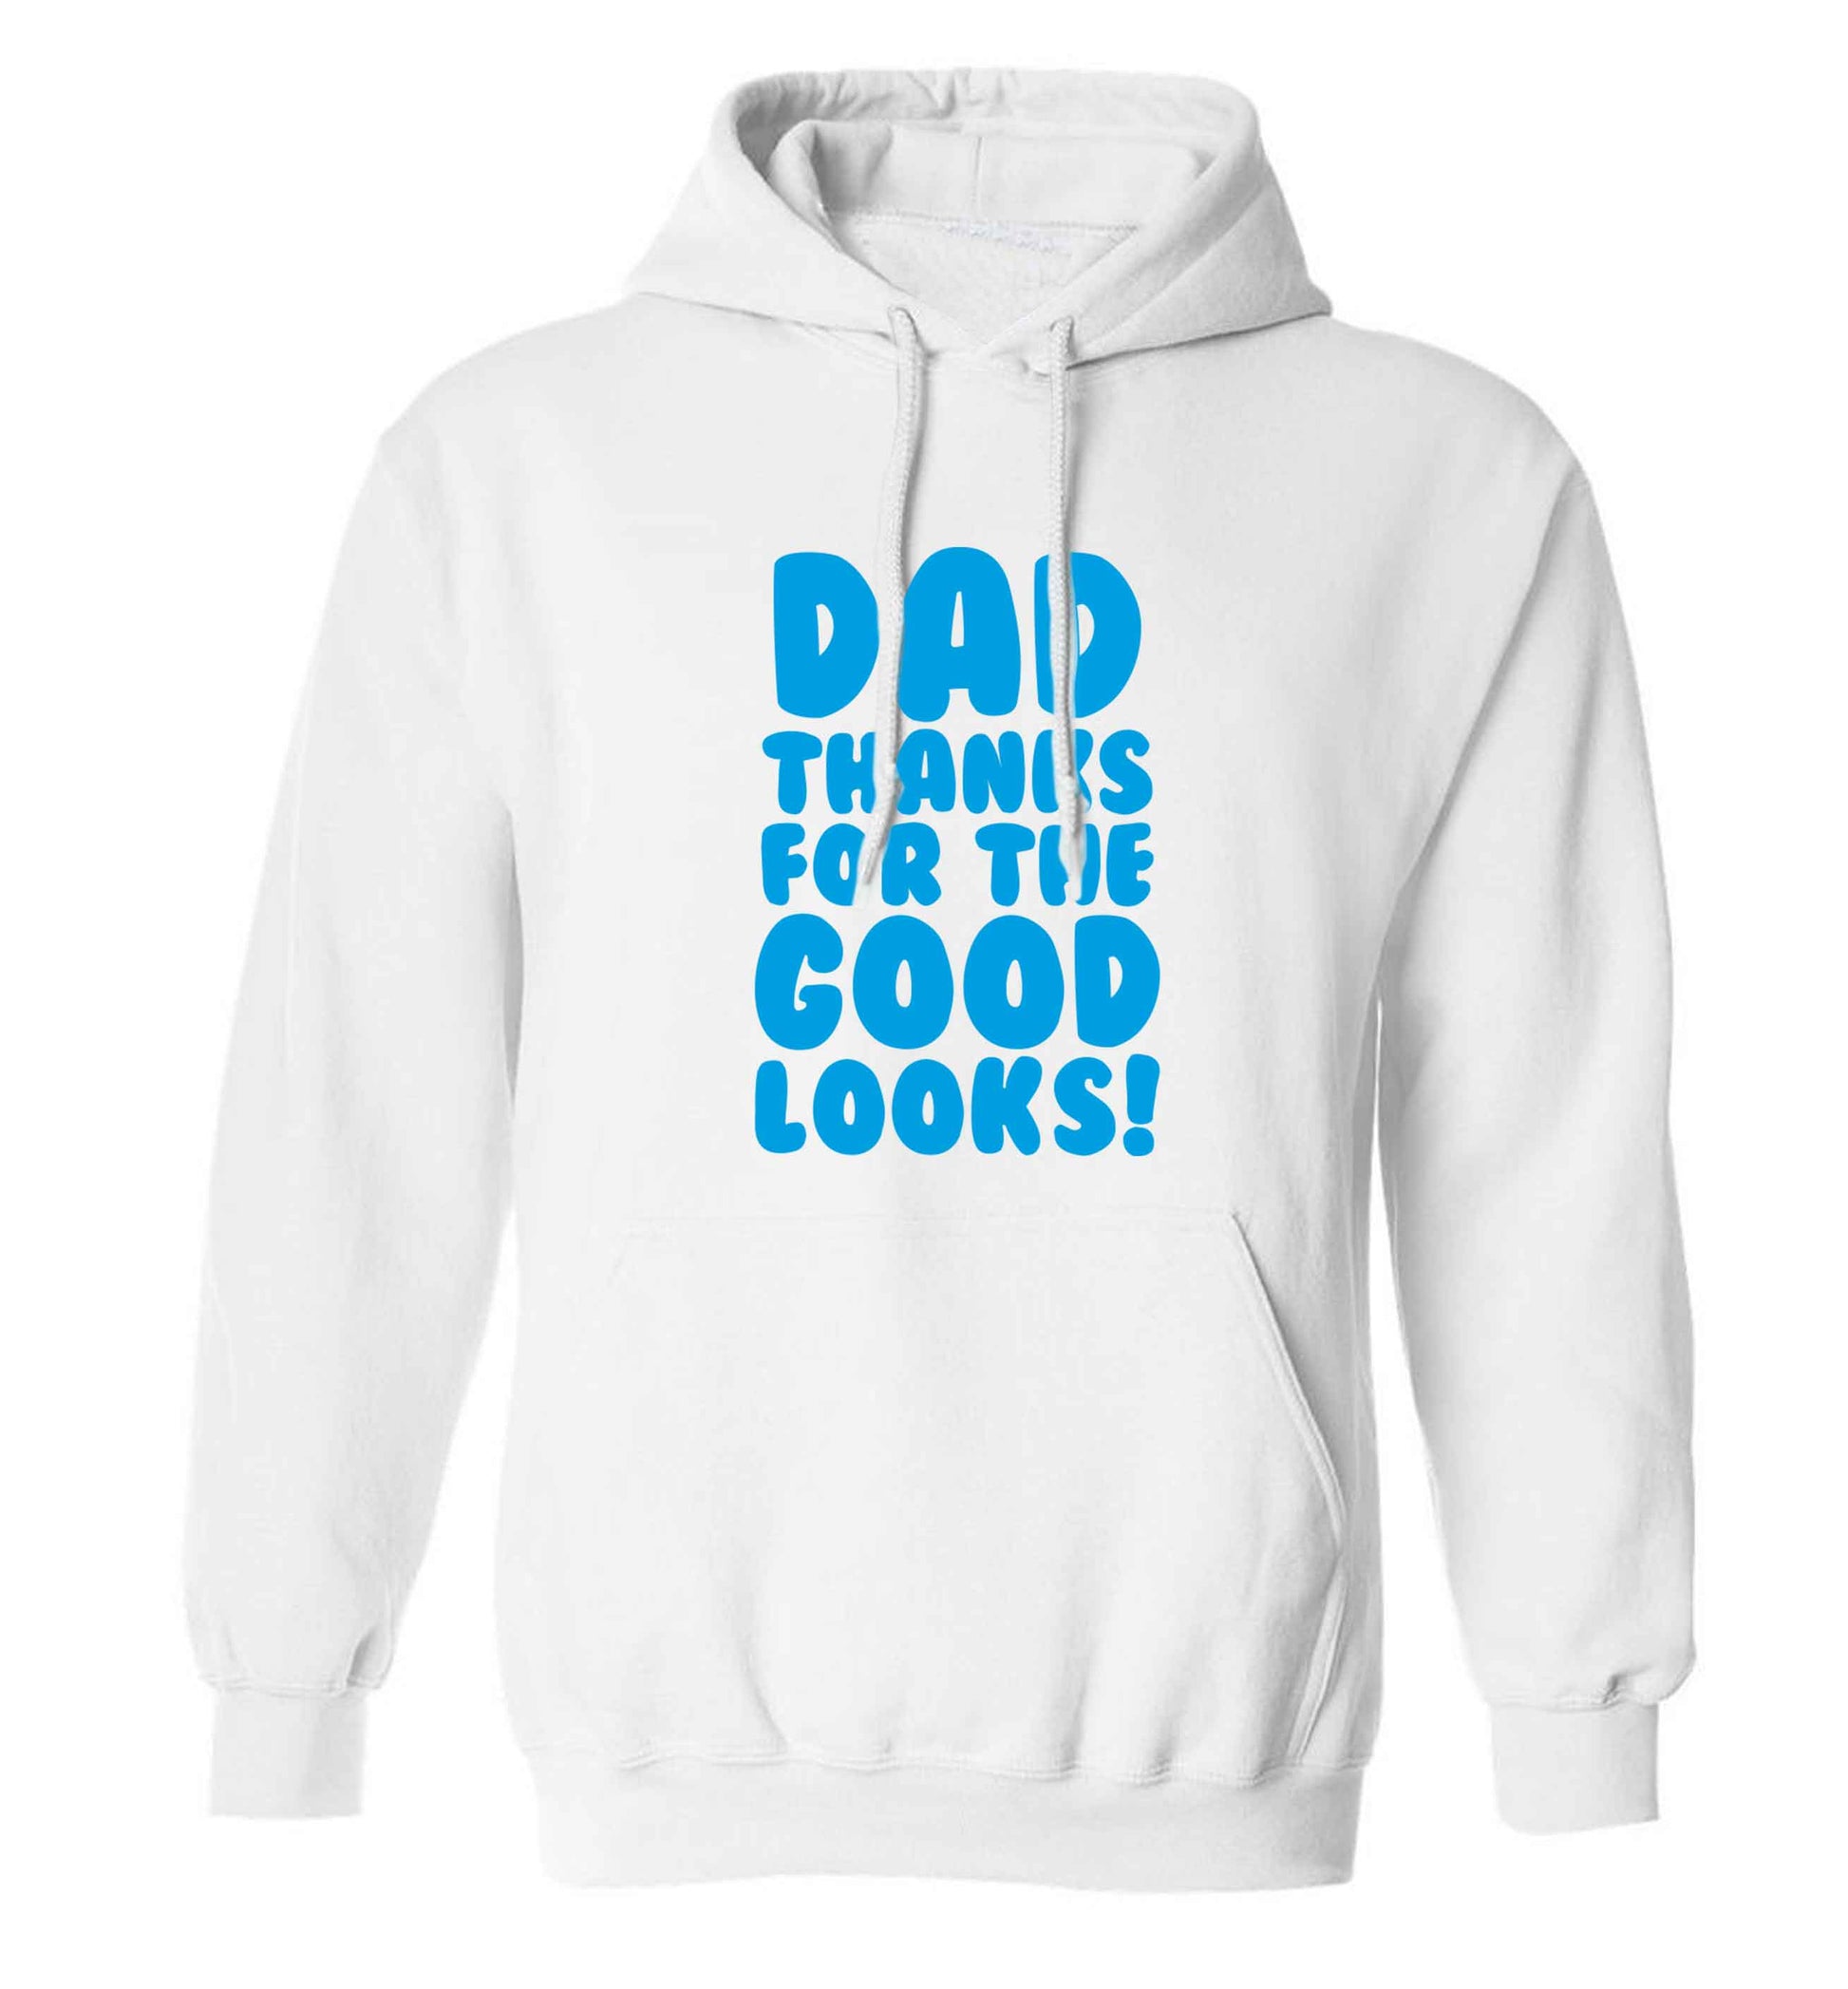 Dad thanks for the good looks adults unisex white hoodie 2XL